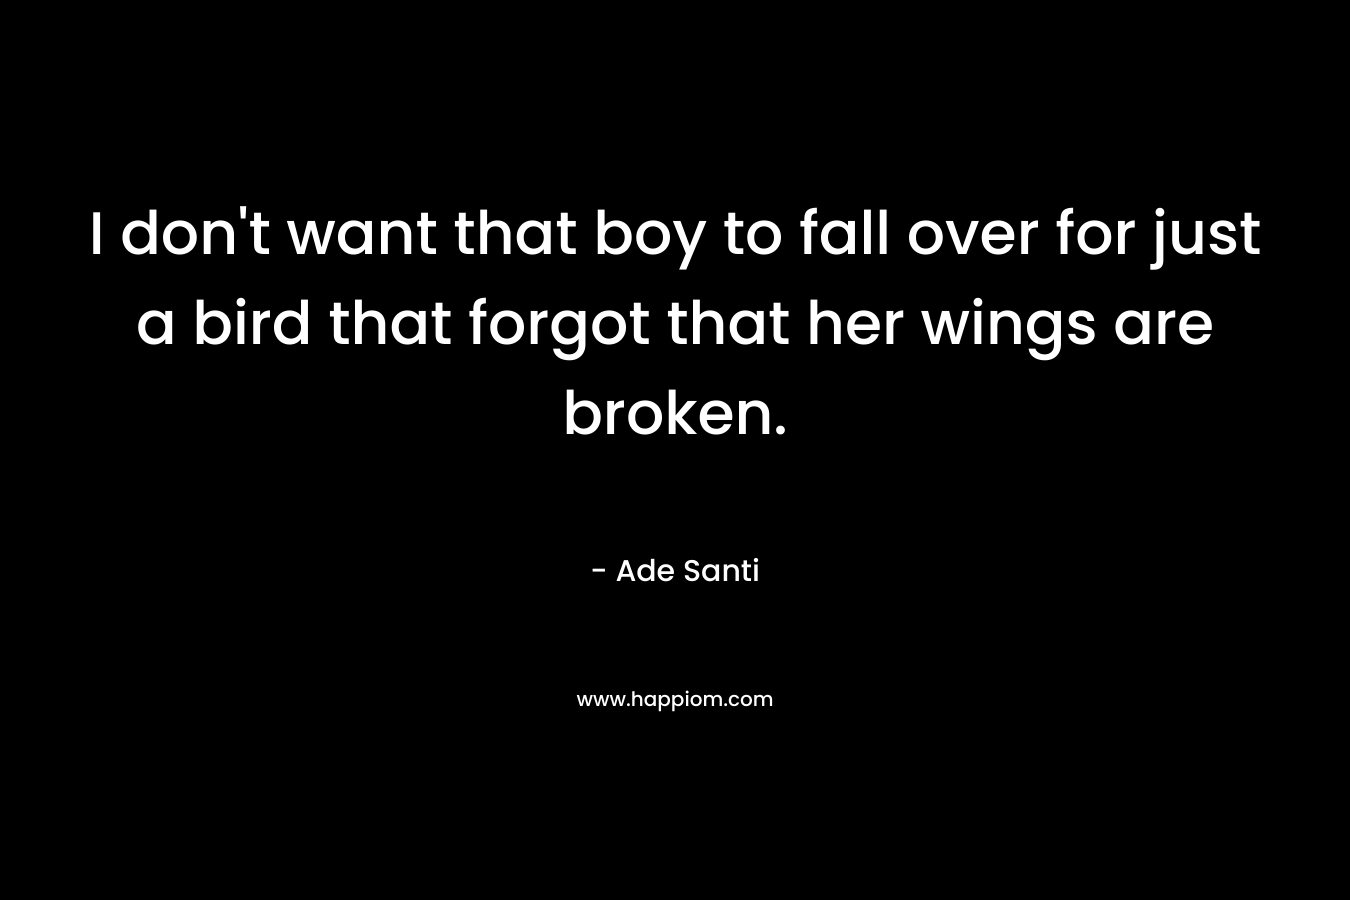 I don’t want that boy to fall over for just a bird that forgot that her wings are broken. – Ade Santi